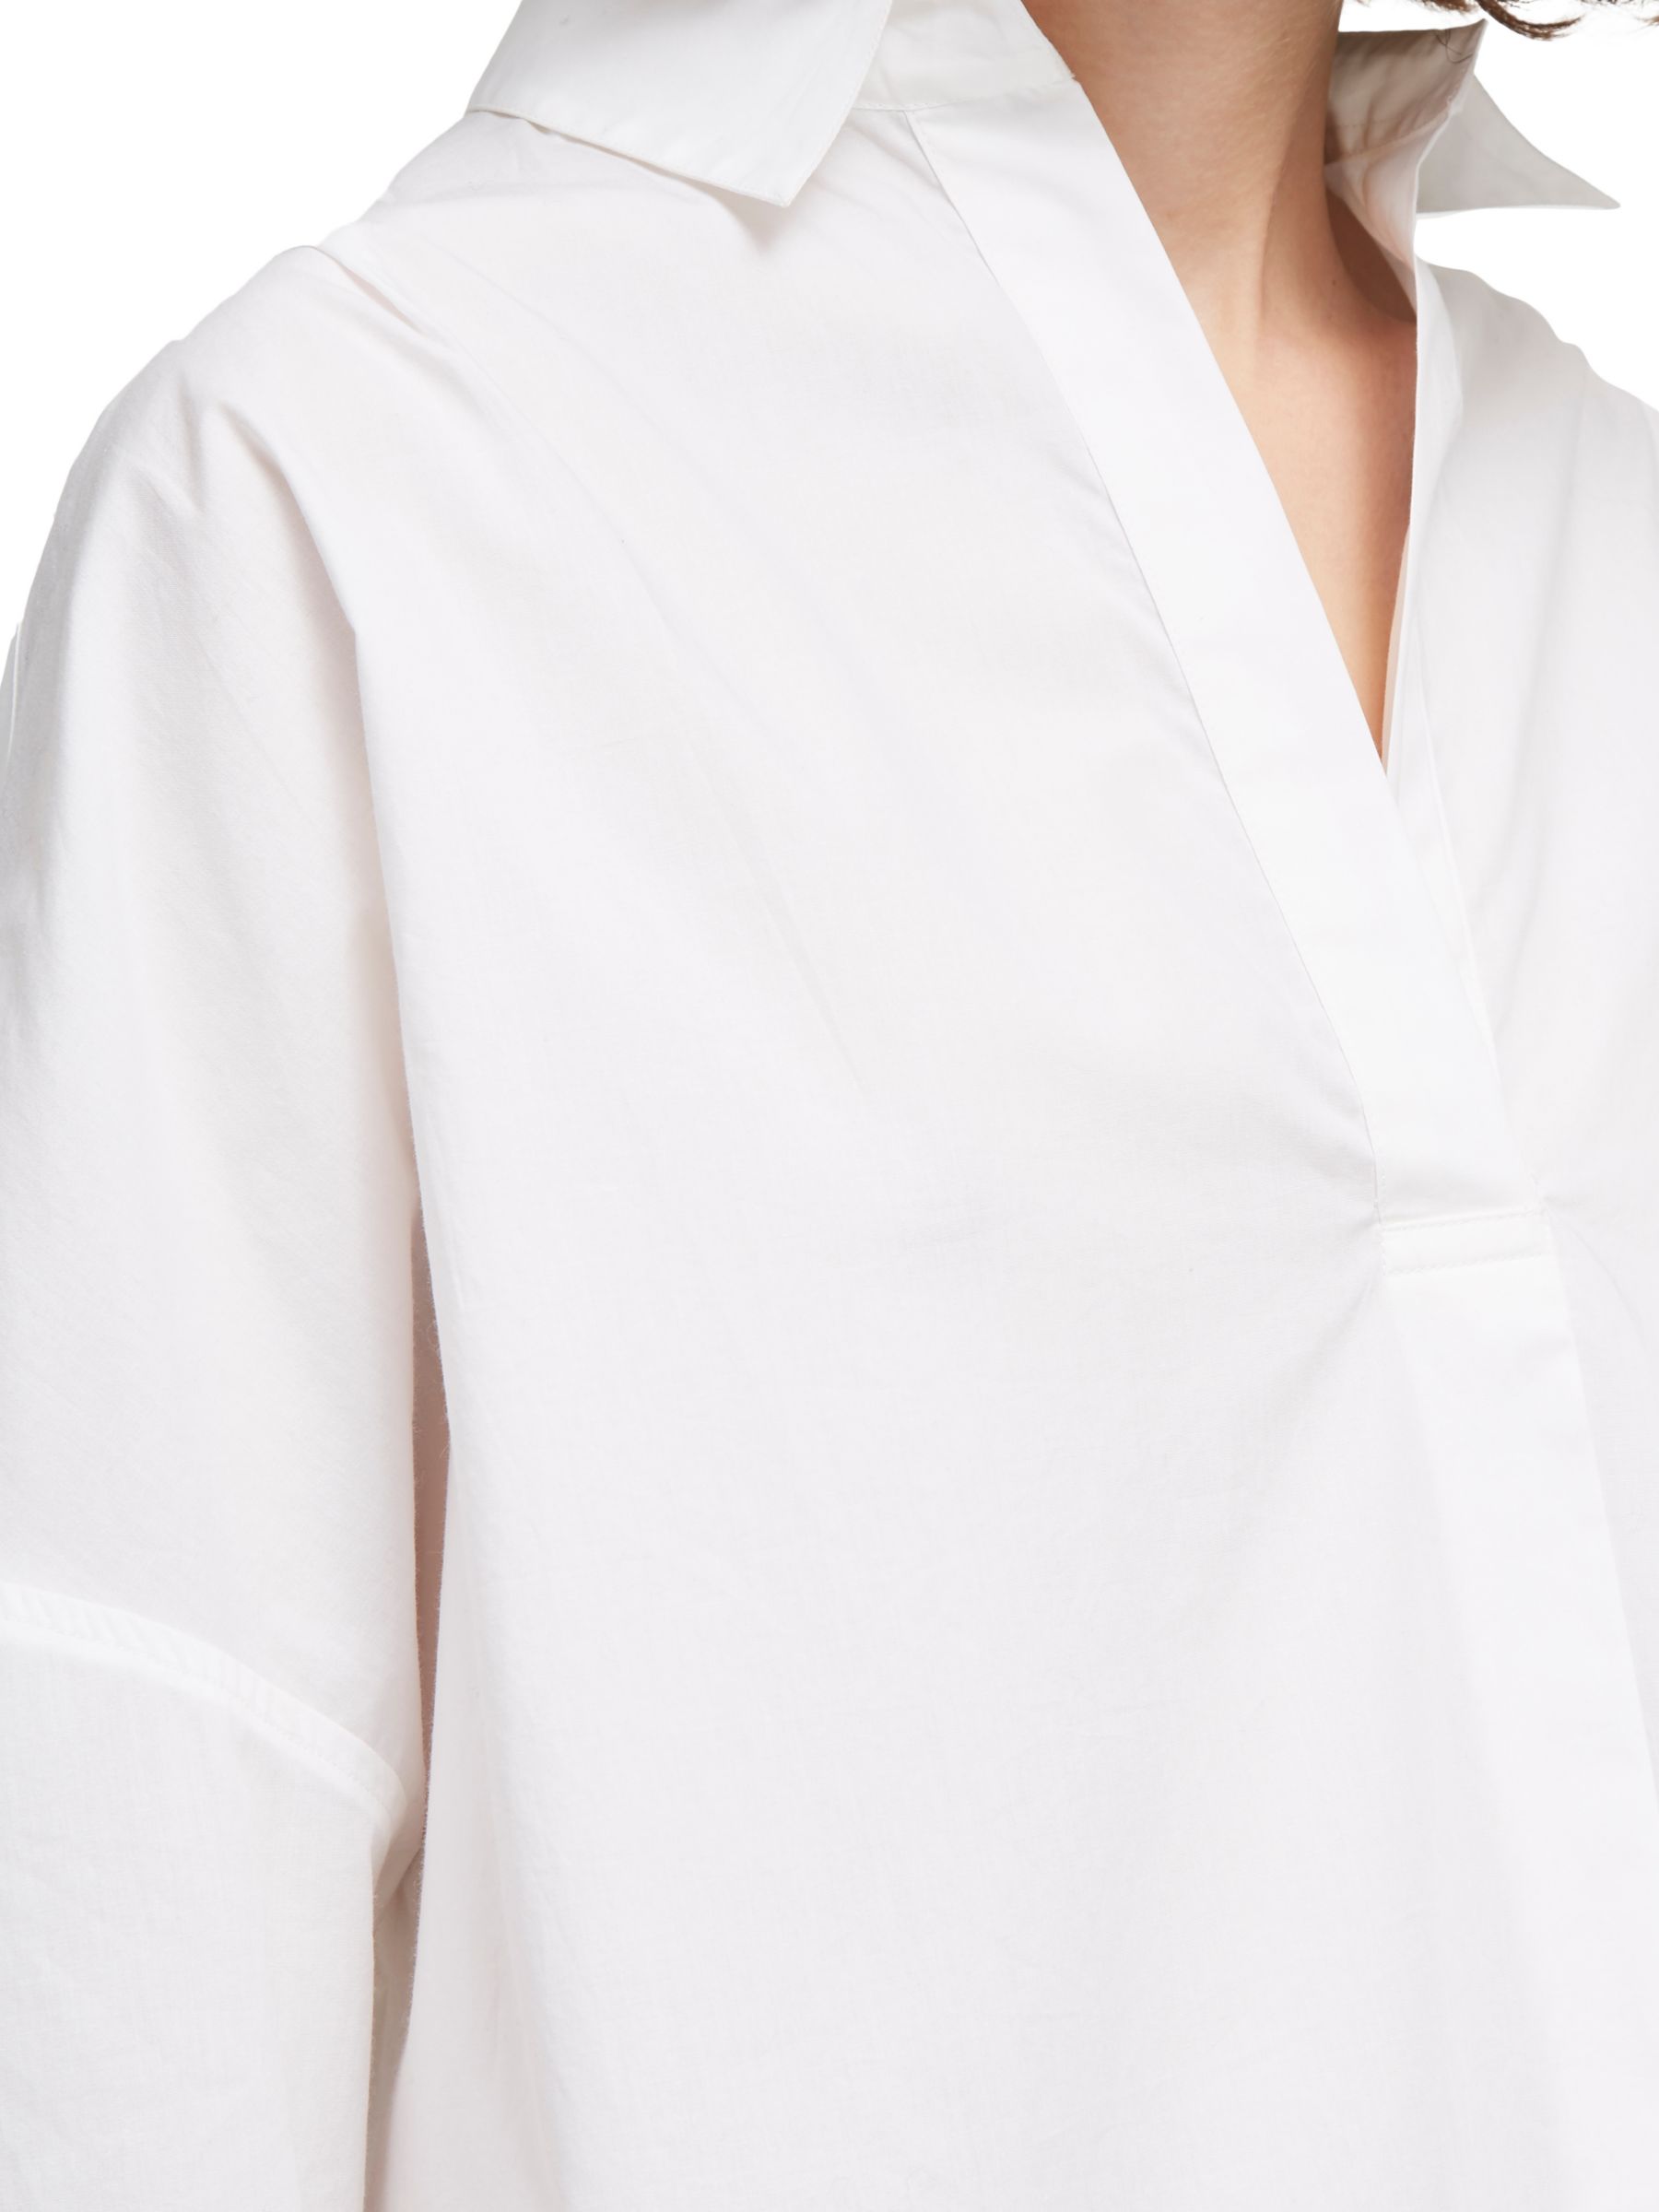 French Connection Rhodes Poplin Shirt, Linen White at John Lewis & Partners